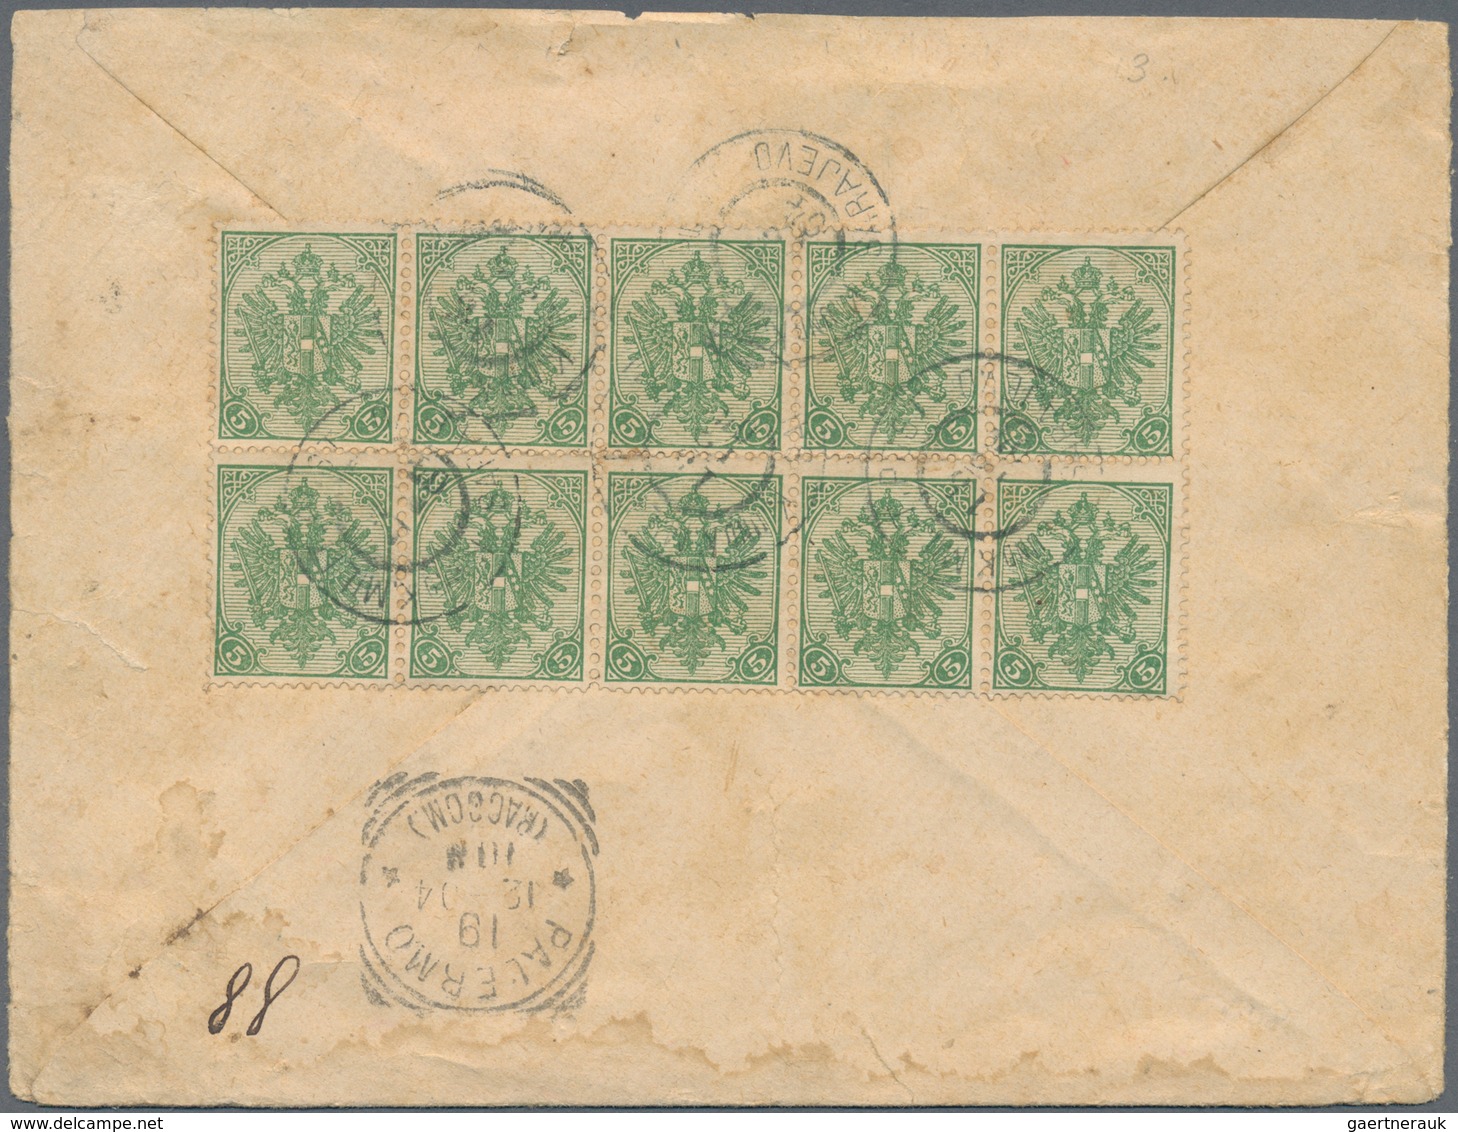 Bosnien und Herzegowina (Österreich 1879/1918): 1884/1906, collection of 136 covers, cards, ppc, use